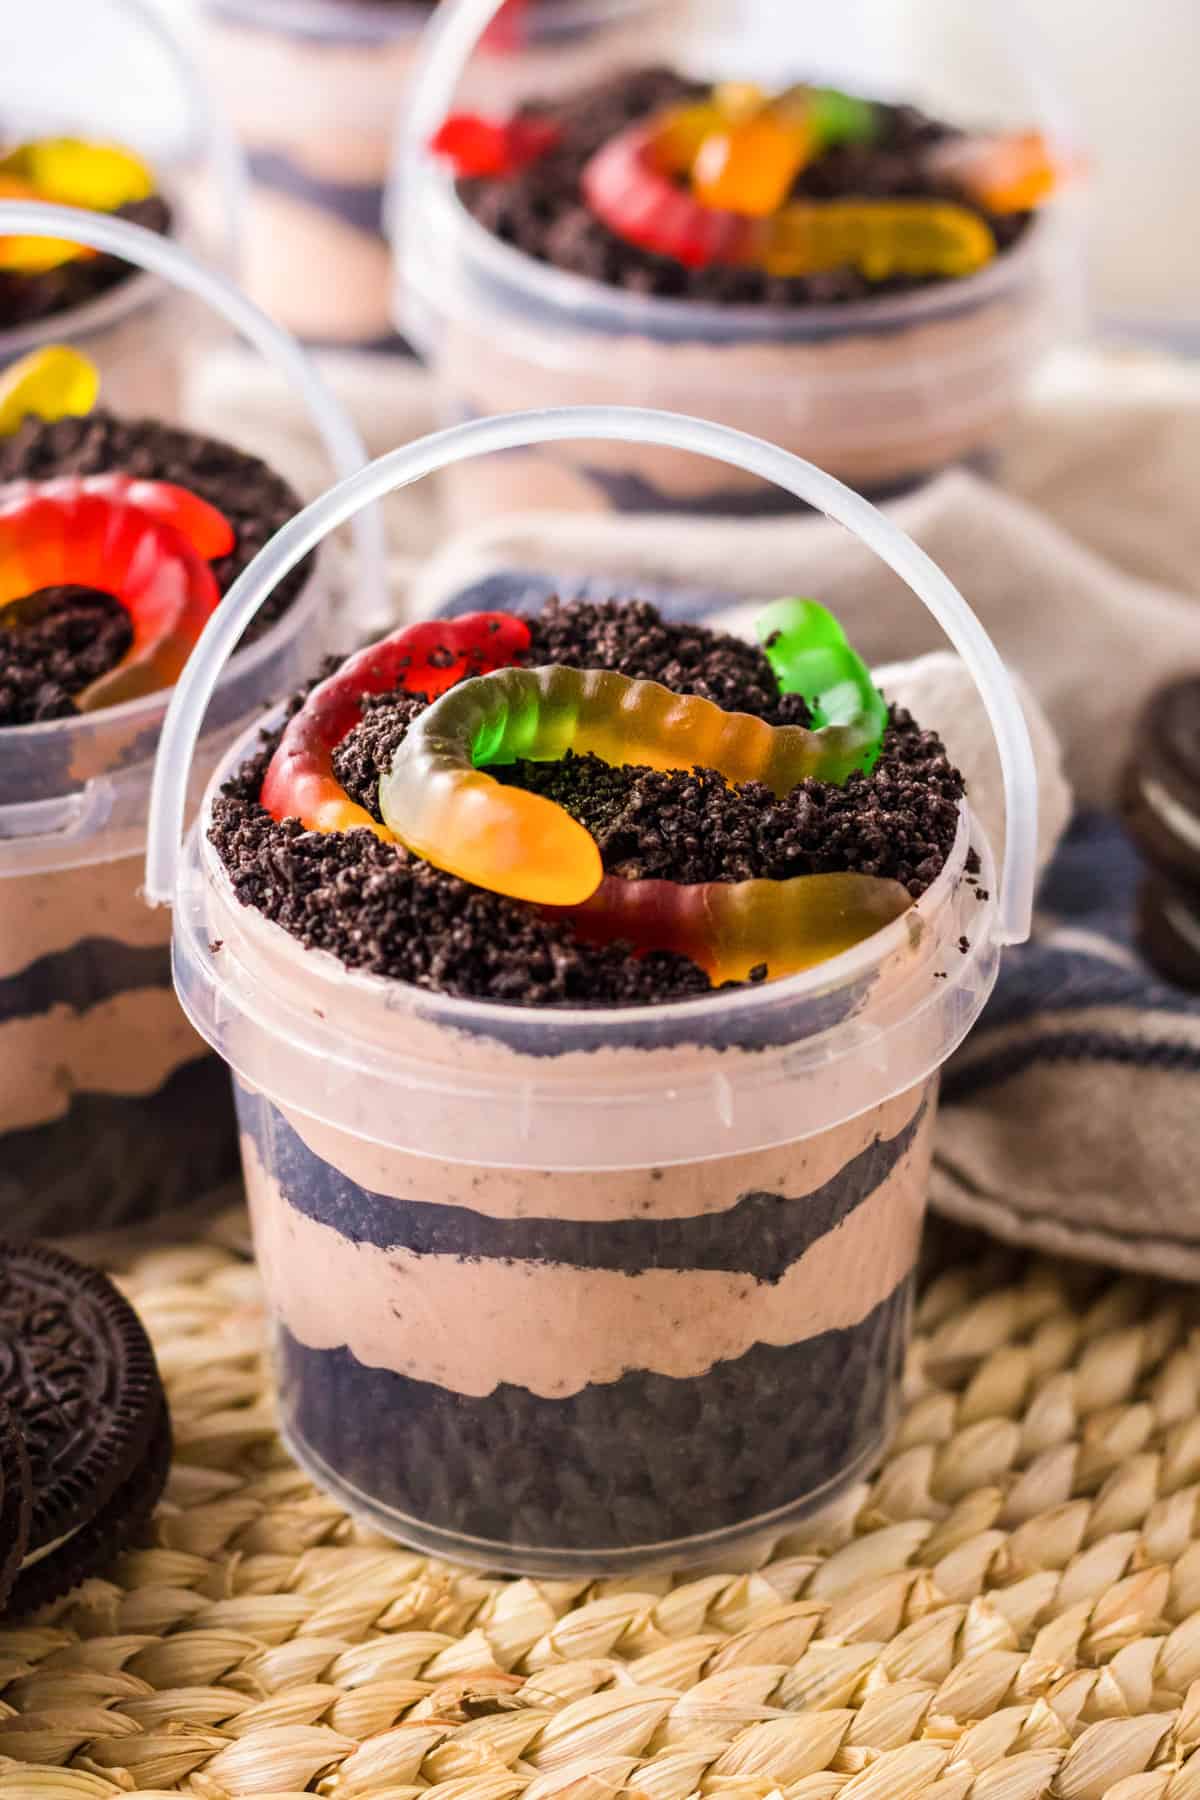 9. Oreo Cookie Cups with Gummy Worms